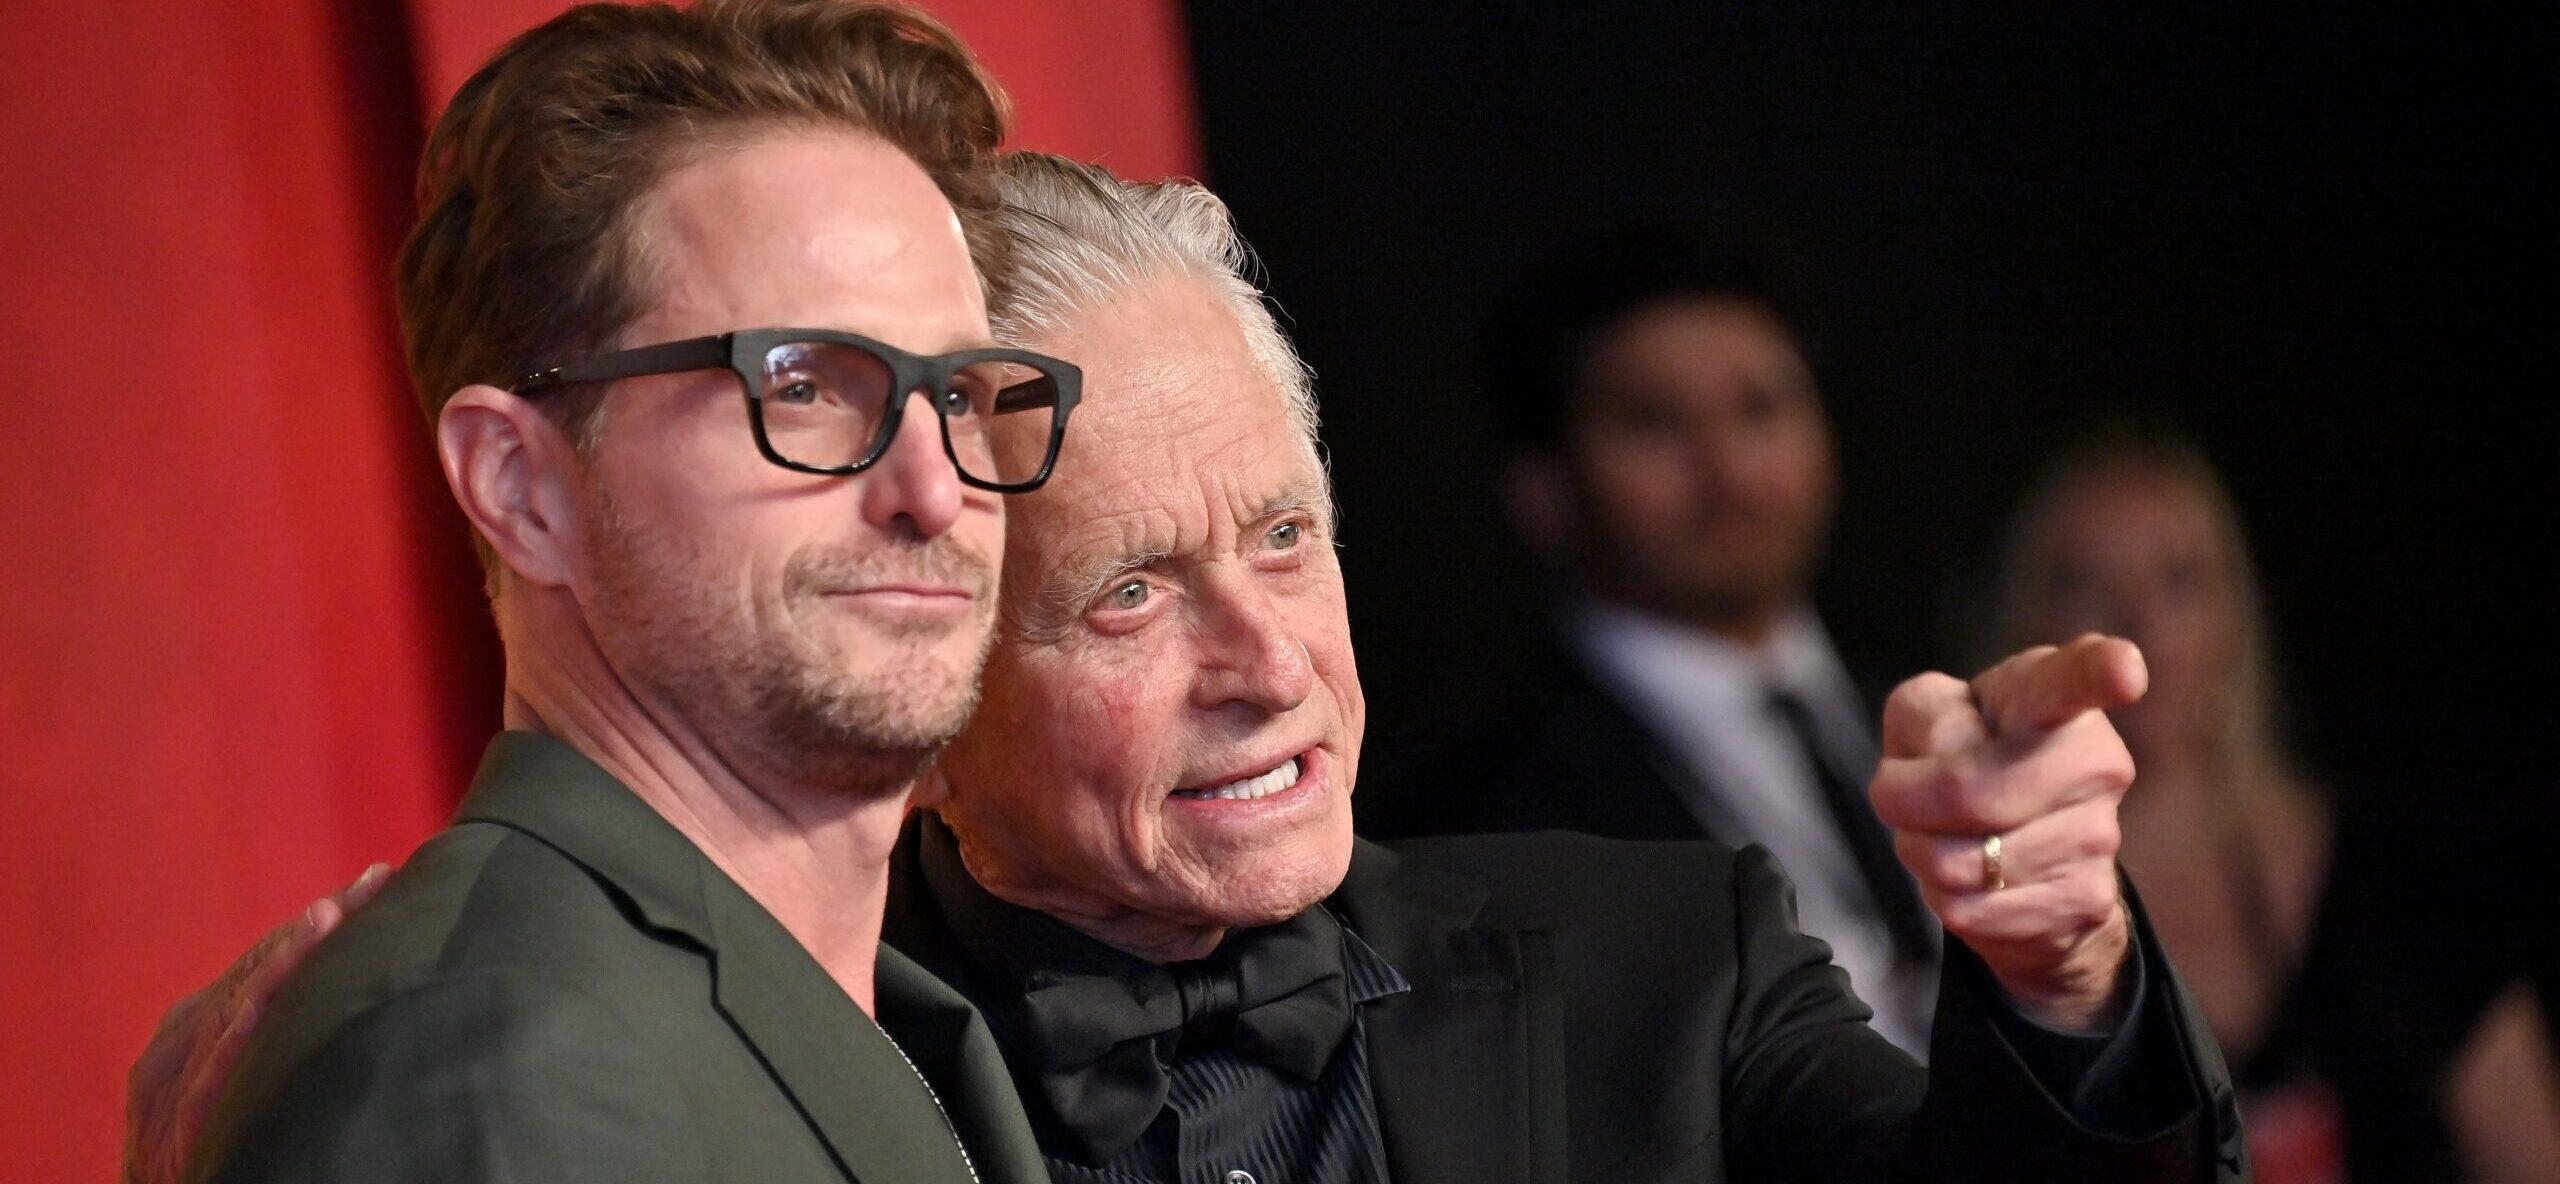 Michael Douglas and son Cameron pose on red carpet.